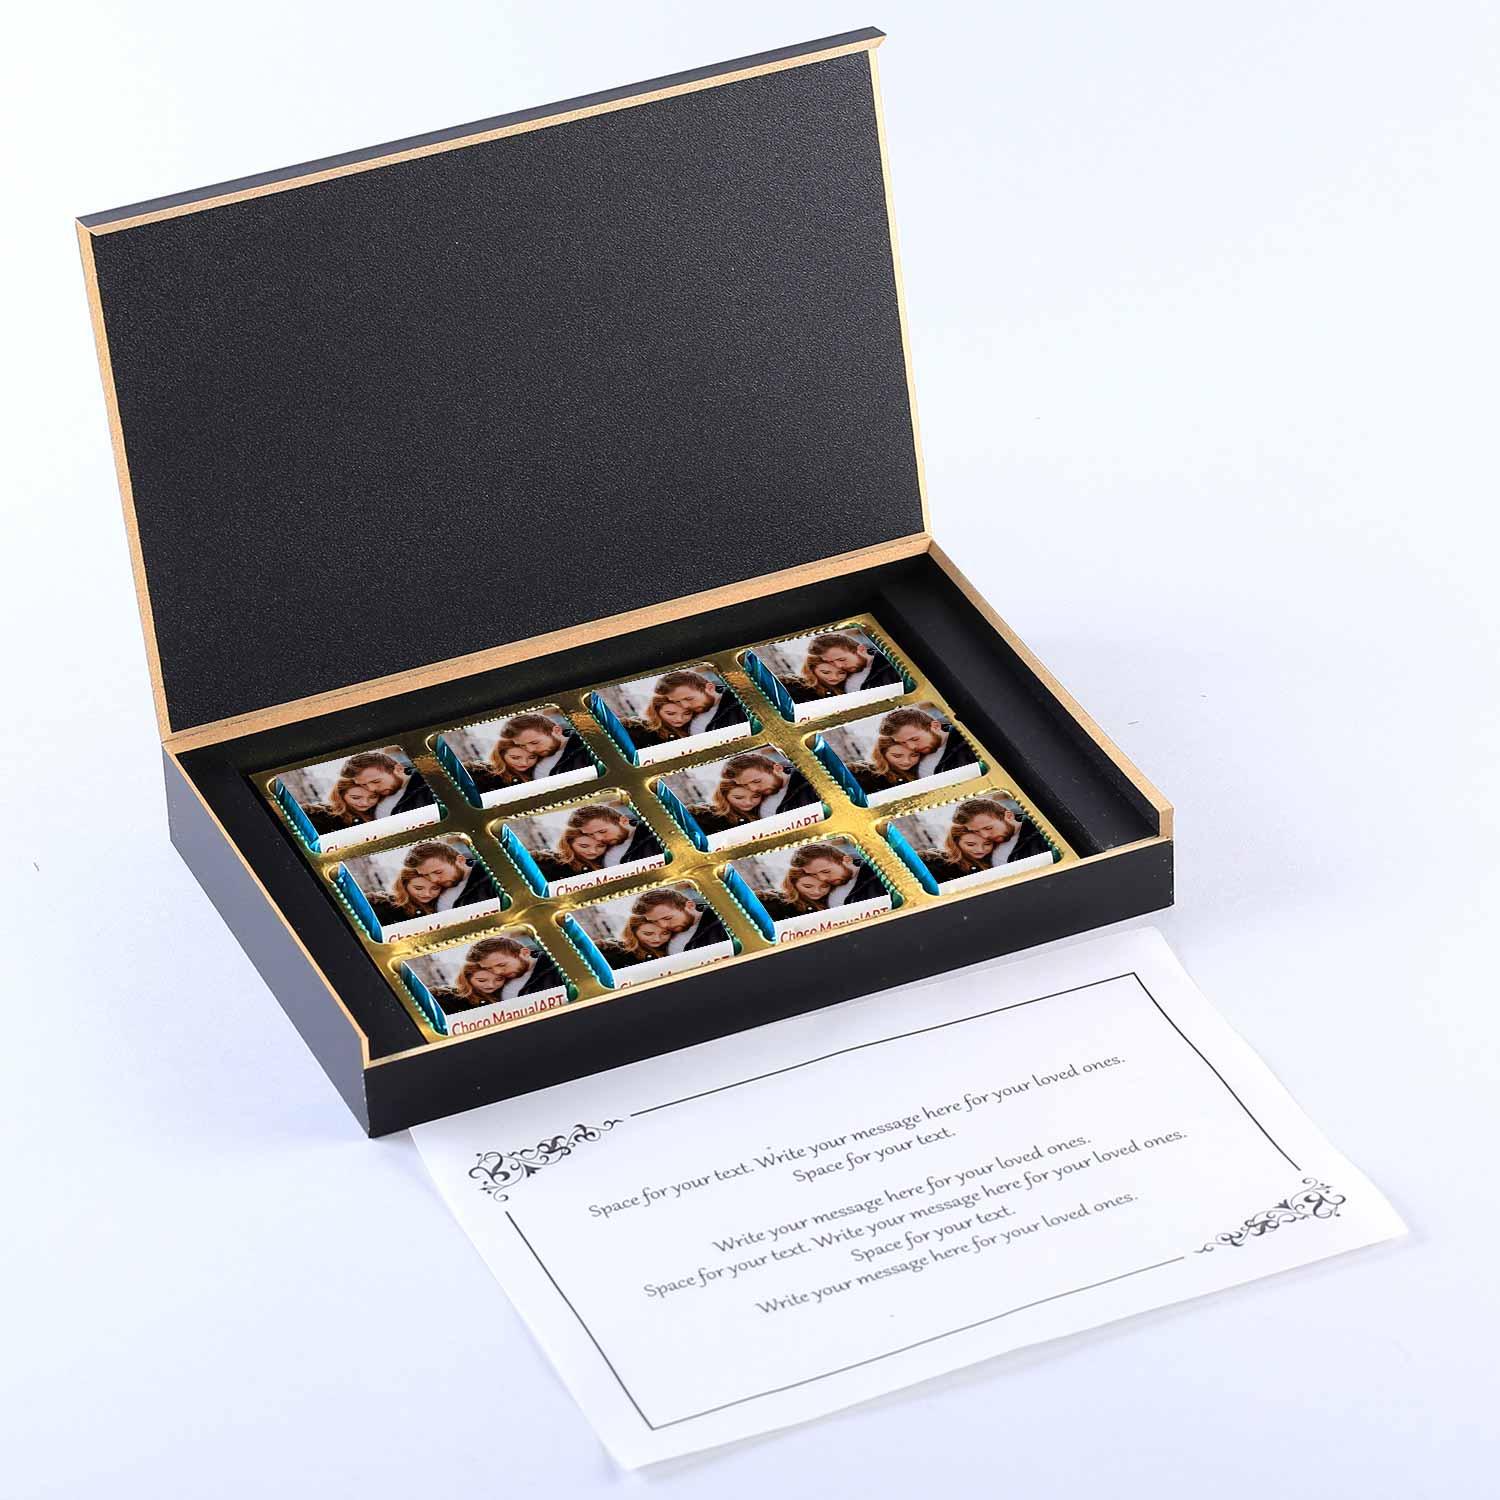 customized chocolates with photo printed on wrapper - Choco Manual ART